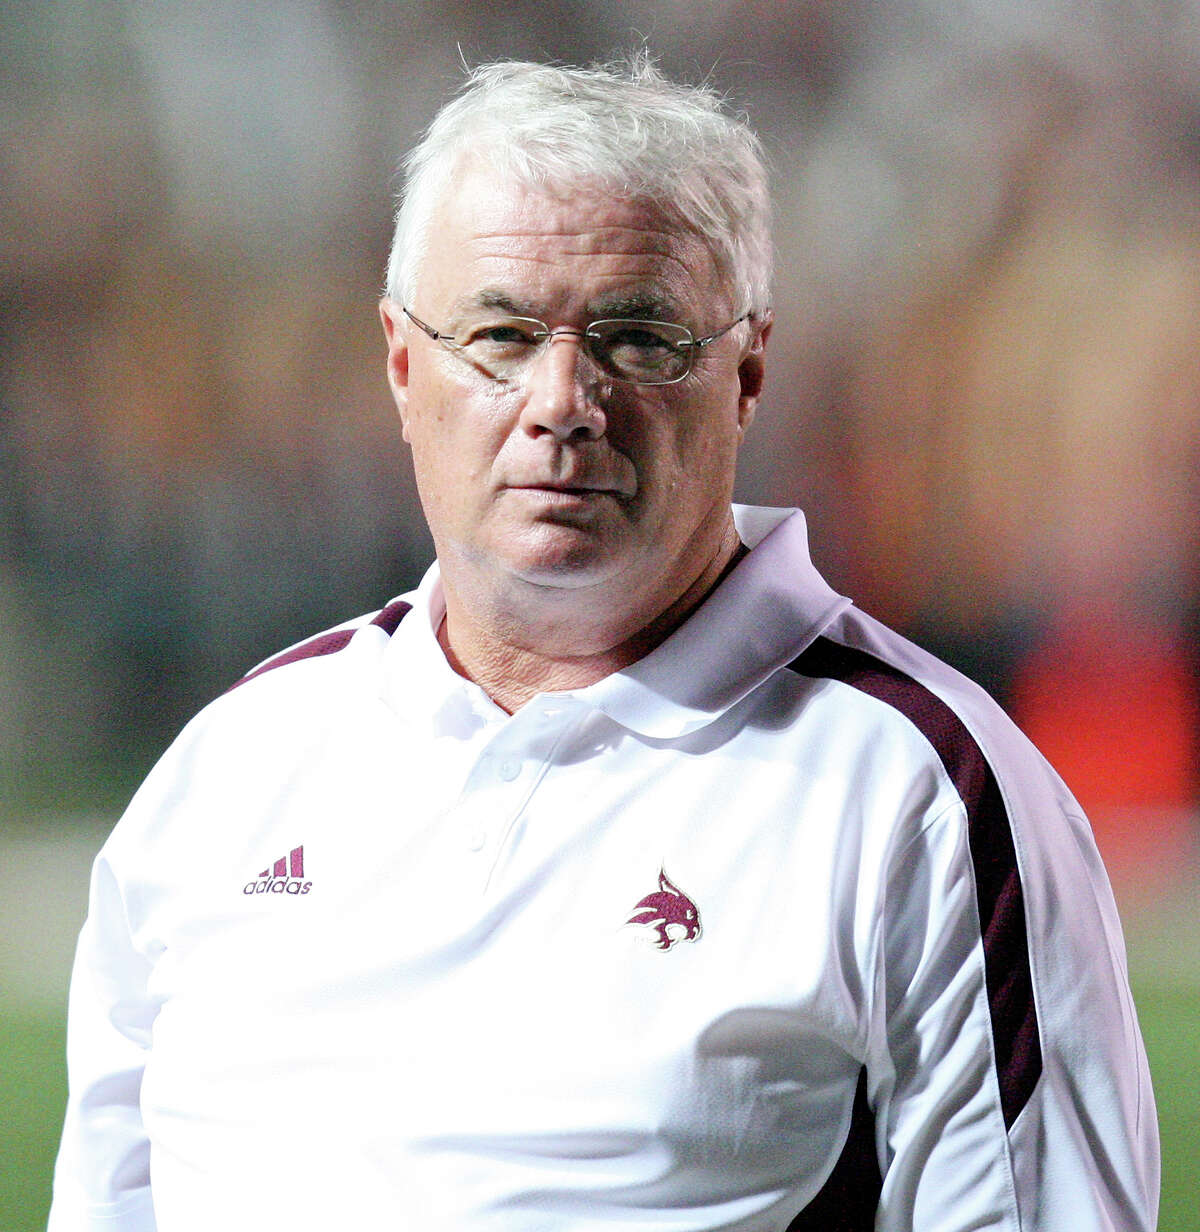 Texas State Bobcats' head coach Dennis Franchione on the sidelines during the game with the Idaho Vandals Saturday Oct. 13, 2012 at Bobcat Stadium in San Marcos, Tx.